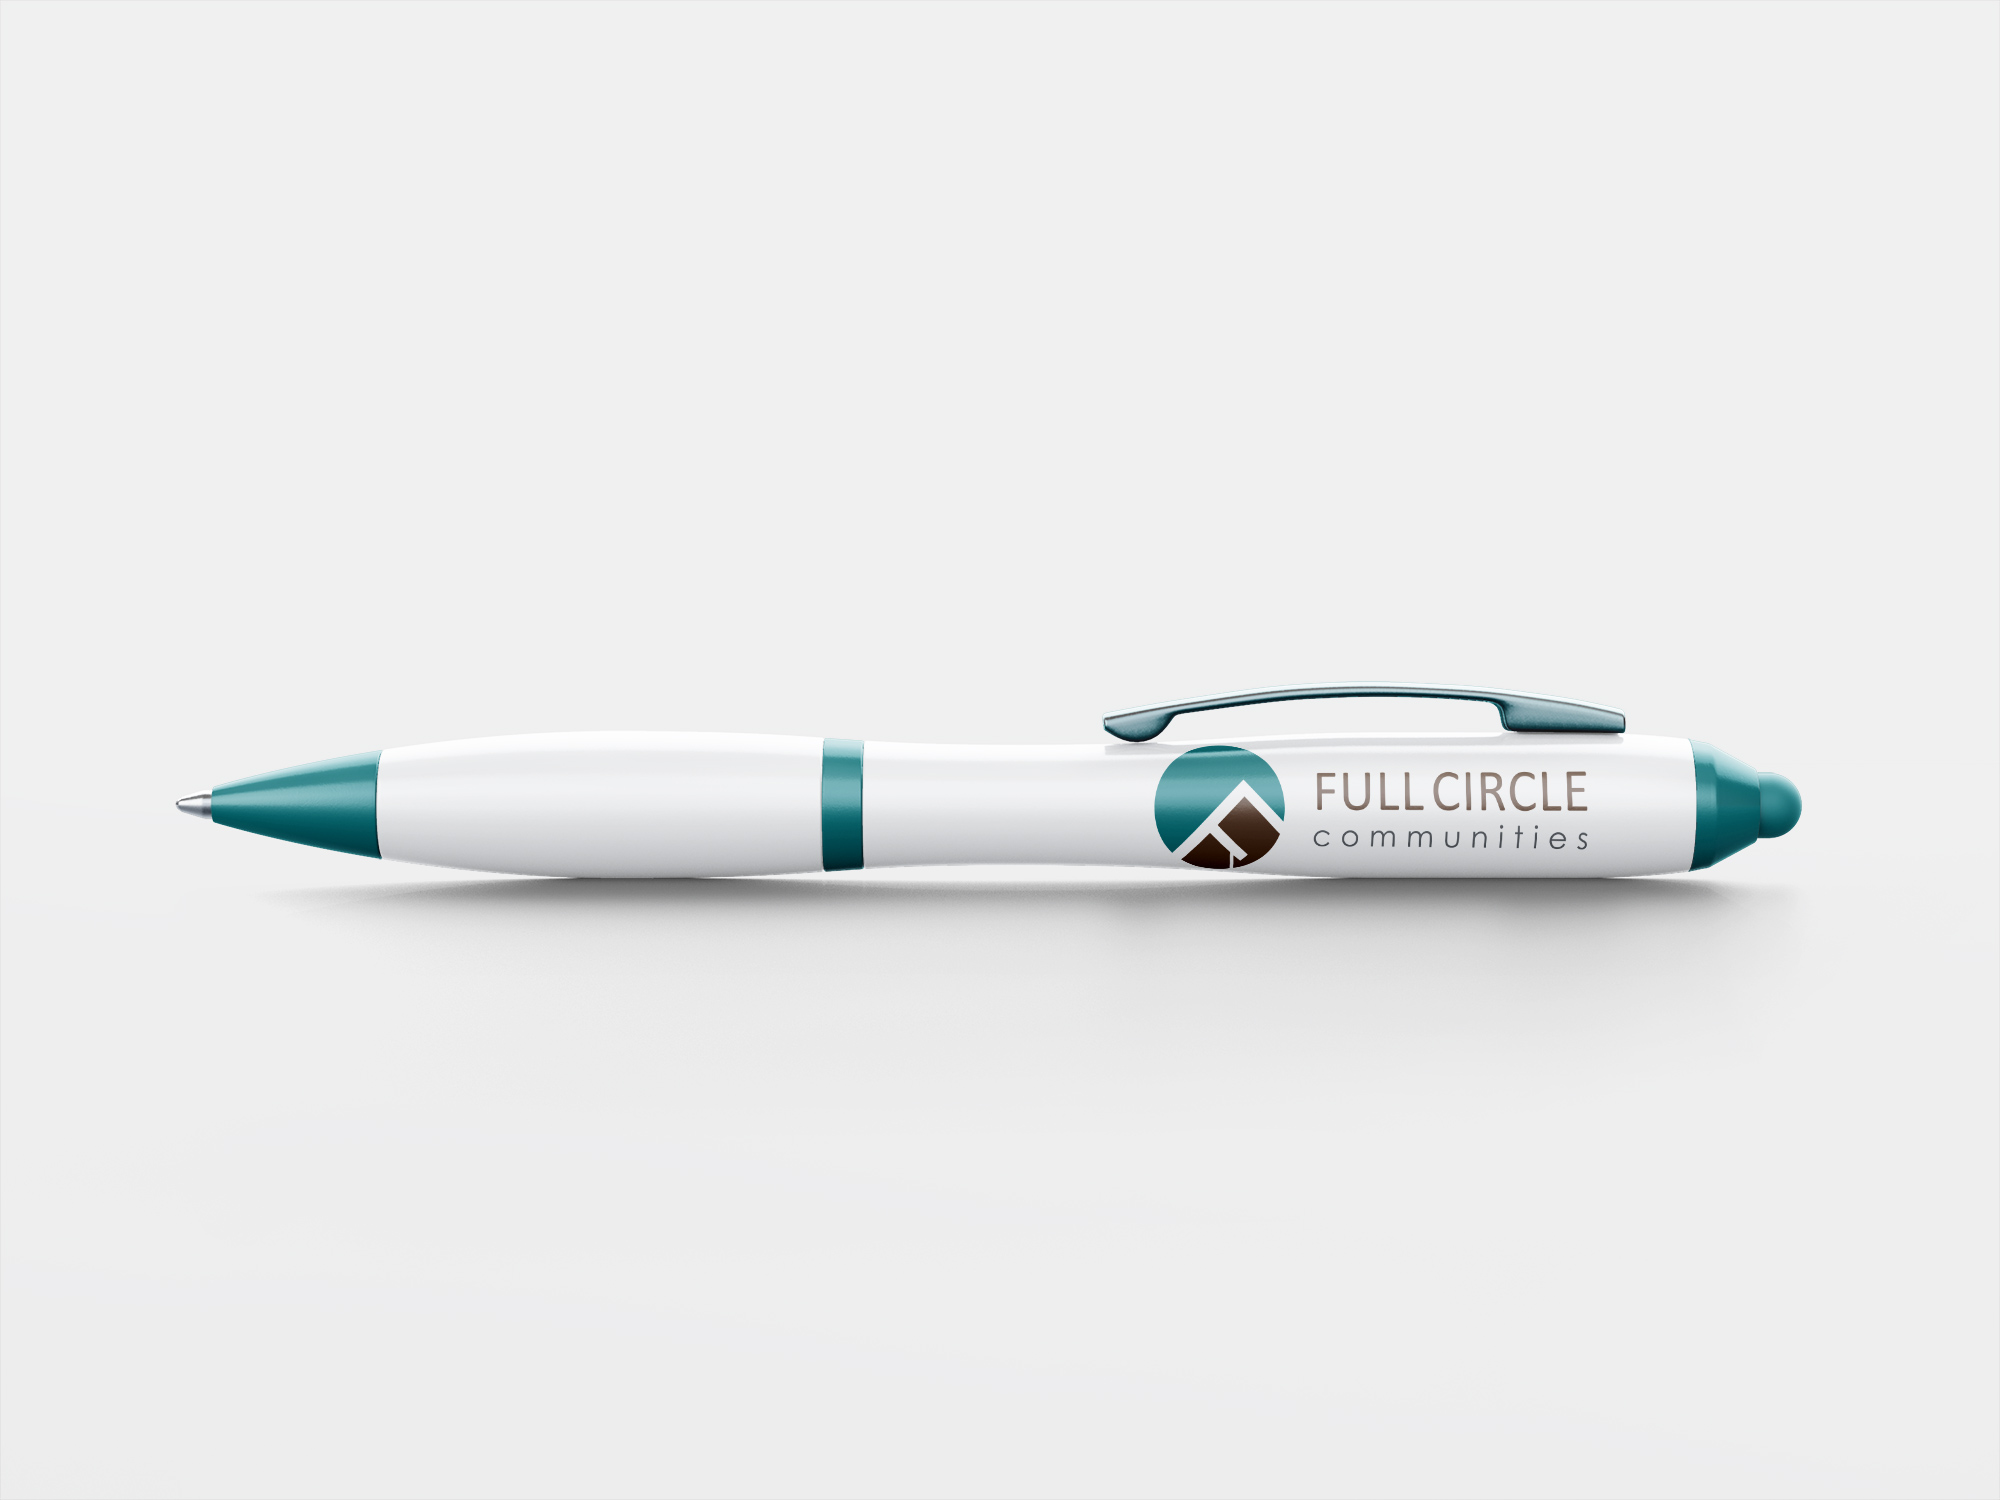 A white and turquoise pen with a company logo on it.